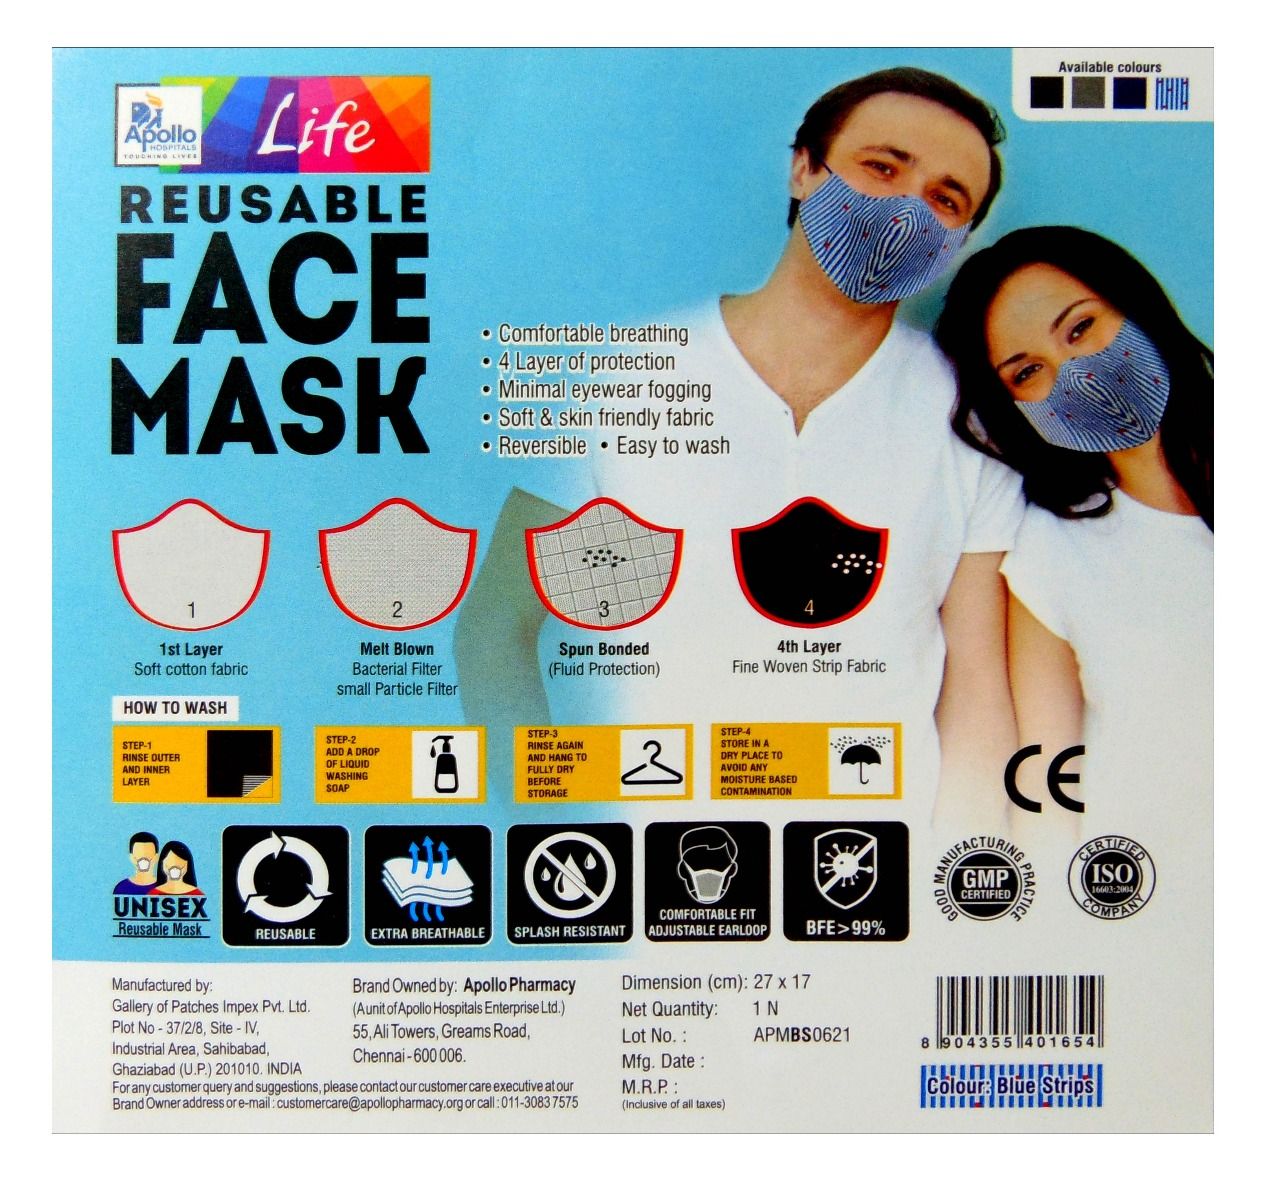 Buy Apollo Life Reusable 4ply Blue Face Mask, 3 Count Online